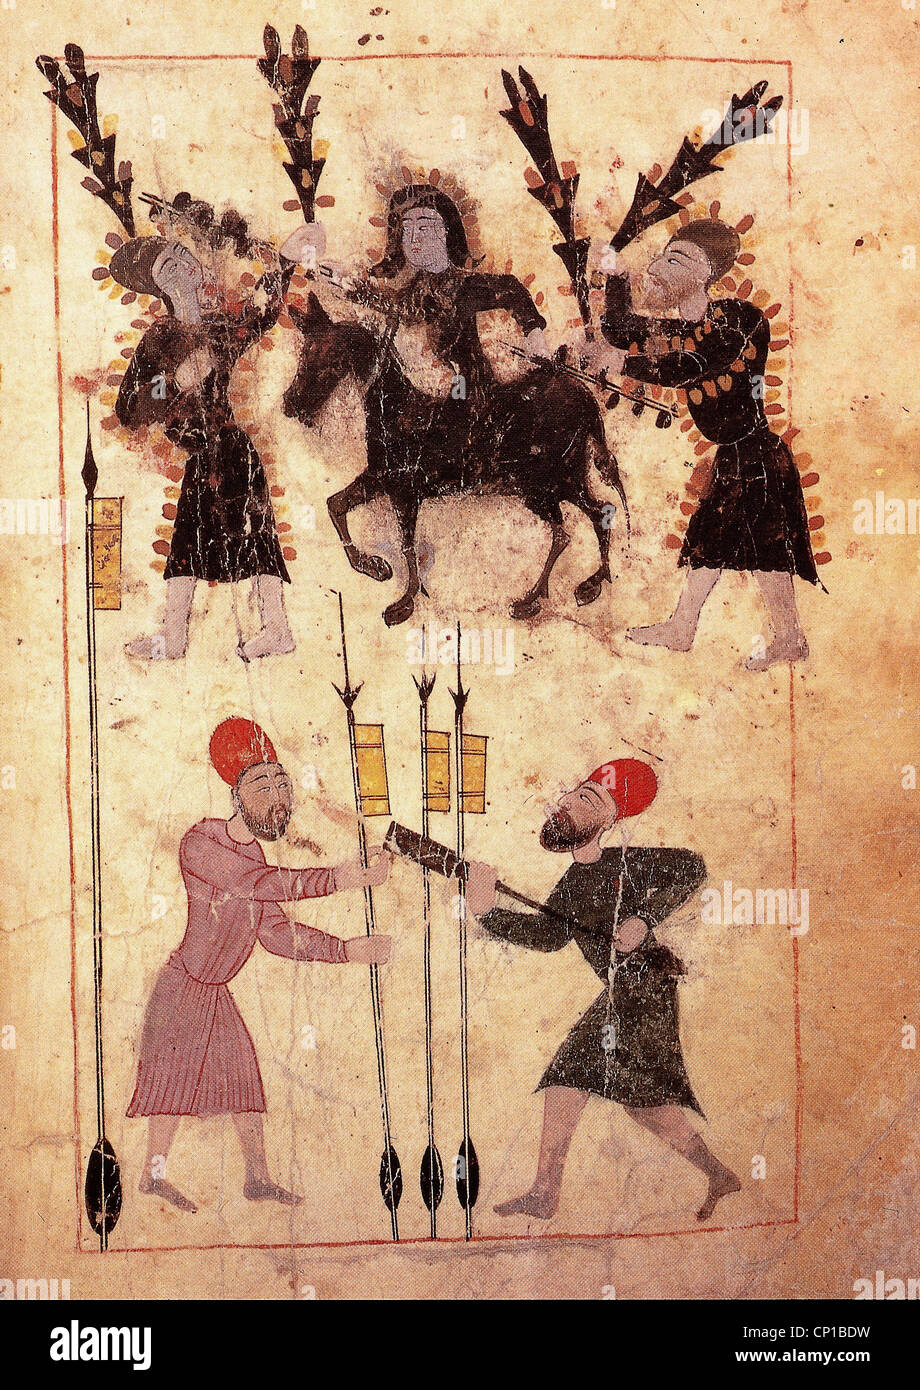 fireworks, Mamluk pyrotechnists, above: with protective clothes made of asbestos, below: with skyrockets, miniature, Egypt, 14th century, historic, historical, mamluq, mamluke, mameluk, mameluke, mamaluke, marmeluke, marmaduke, orient, Arabia, Middle Ages, illumination, Islamic art, Moslem, Muslim, Moslems, Muslims, rockets, rocket, skyrocket, medieval, people, Additional-Rights-Clearences-Not Available Stock Photo